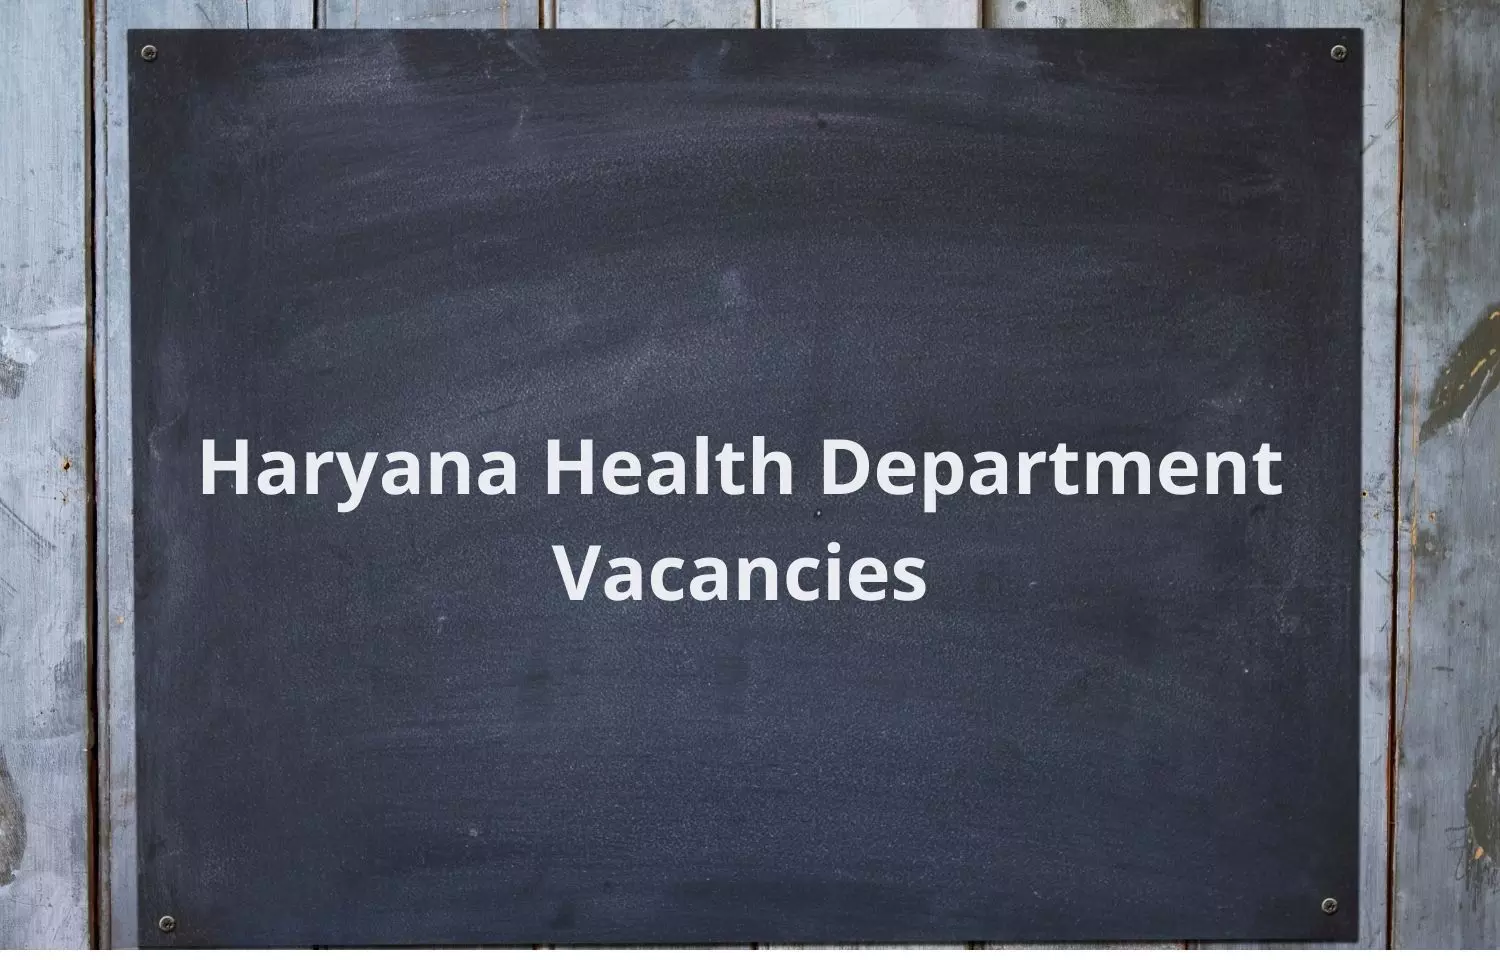 Apply now with Haryana Health Department for 980 Vacancies of Medical Officer Post, Details